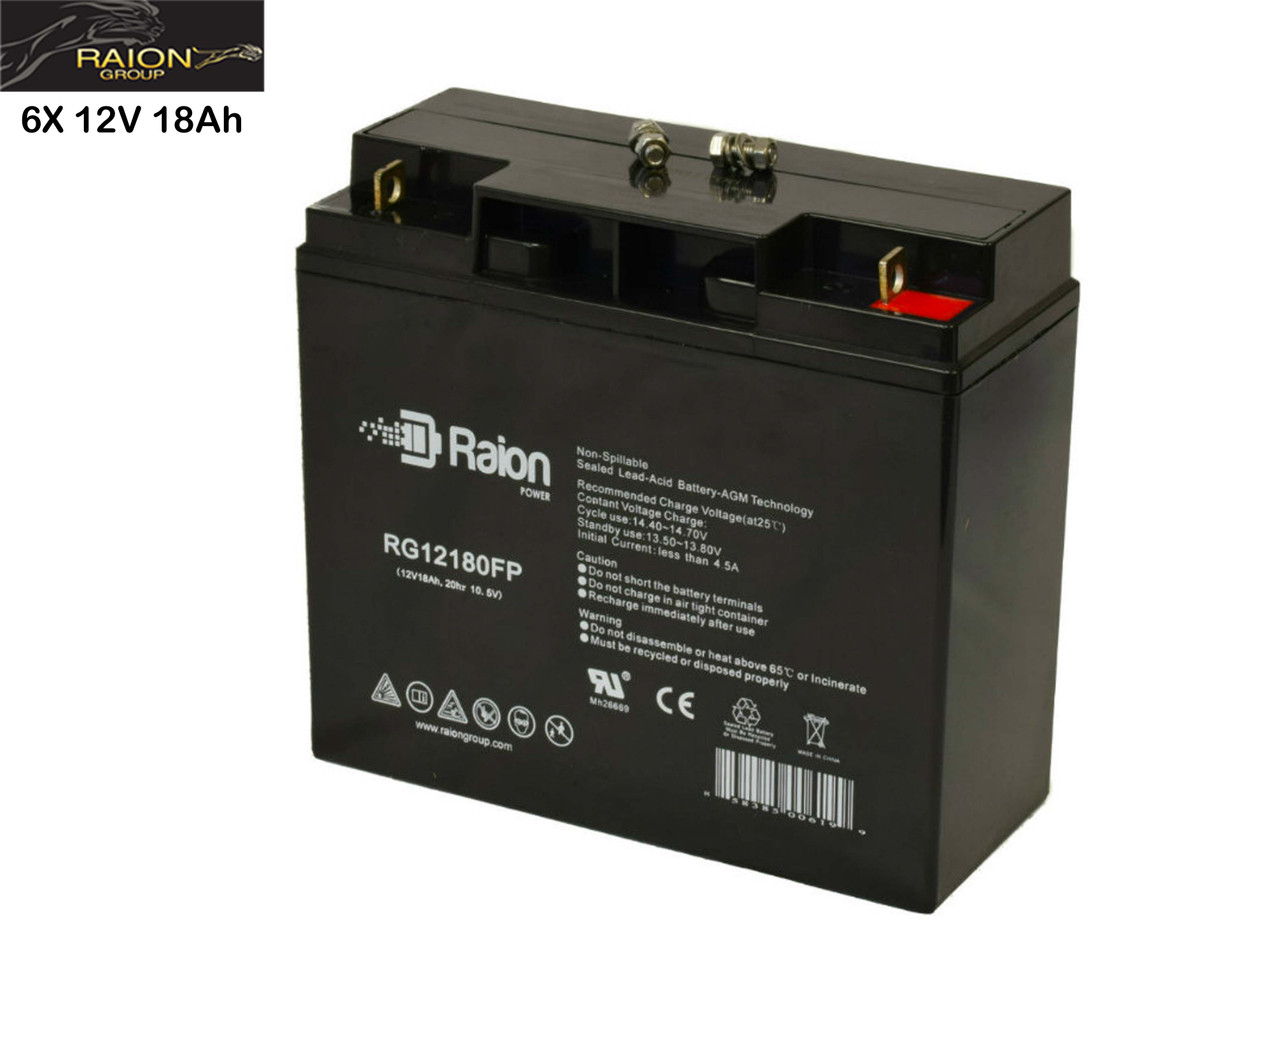 Raion Power Replacement 12V 18Ah Battery for AWC Prestige - 6 Pack